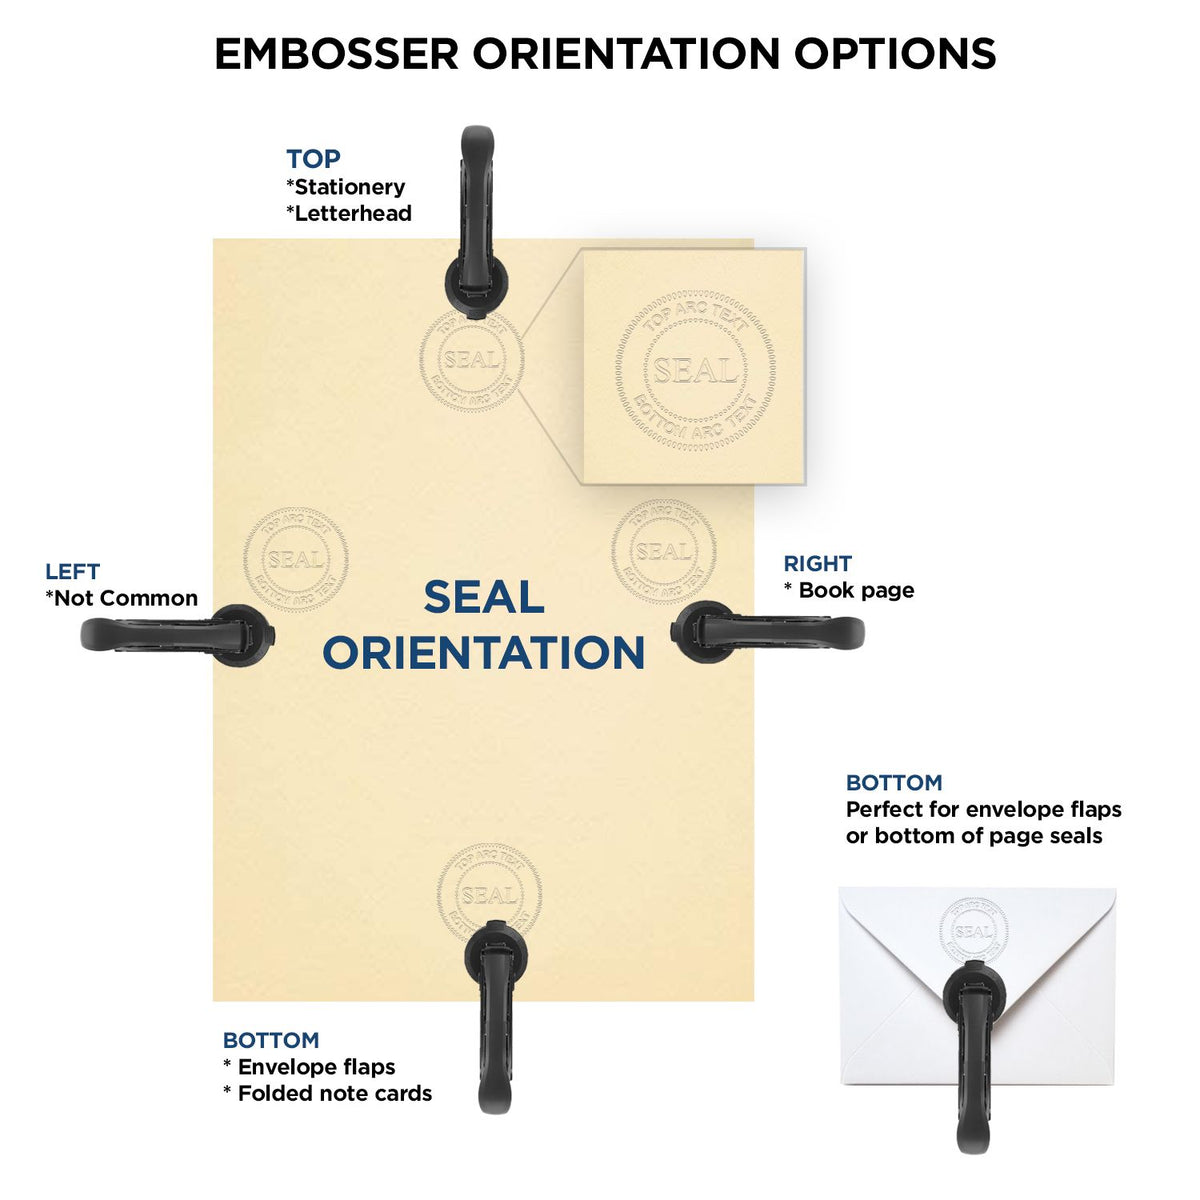 An infographic for the Heavy Duty Cast Iron Guam Architect Embosser showing embosser orientation, this is showing examples of a top, bottom, right and left insert.